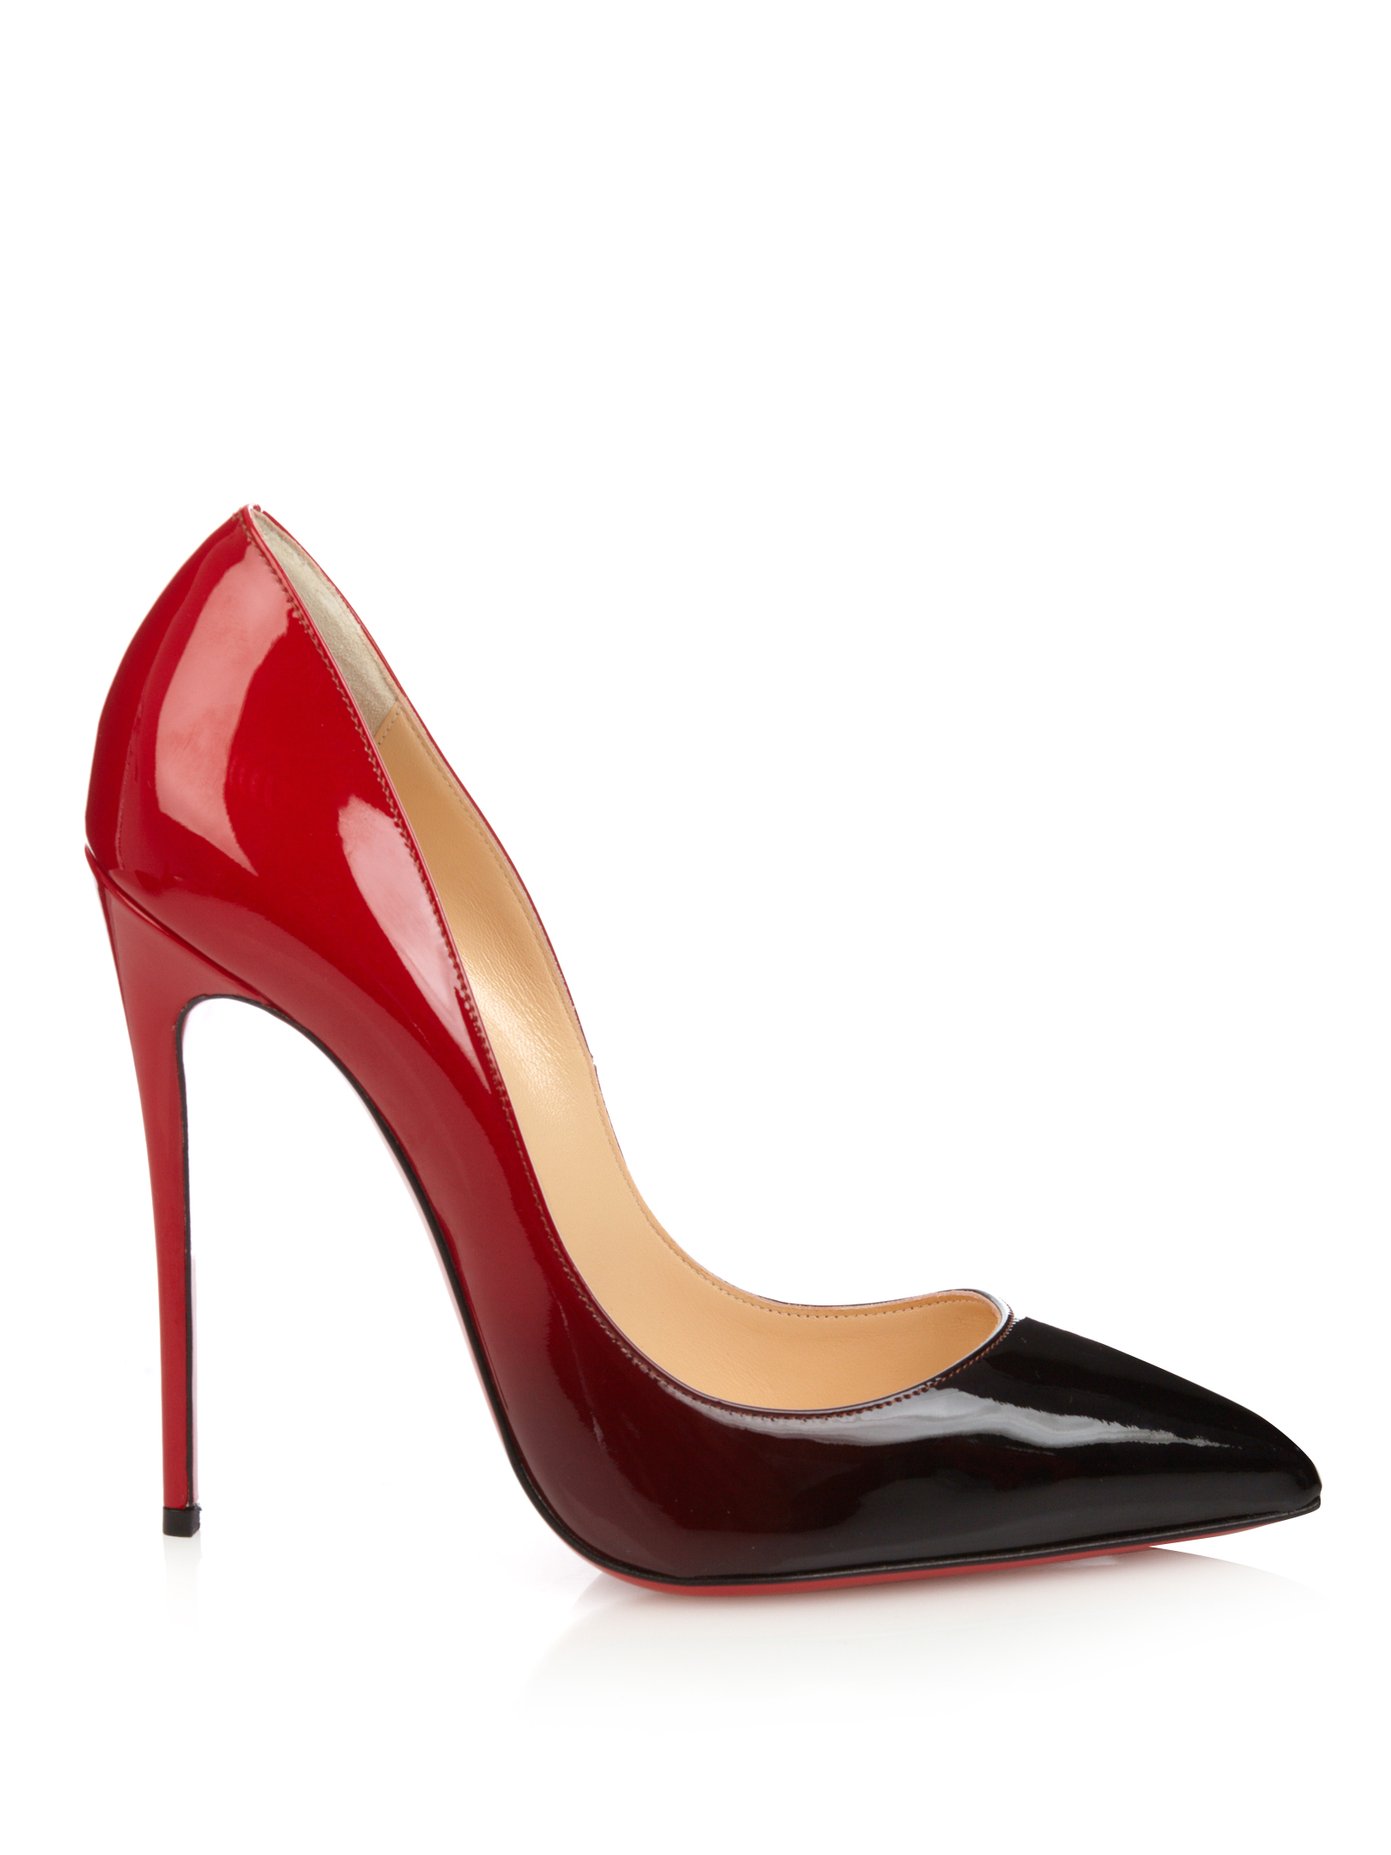 louboutin pigalle 120mm